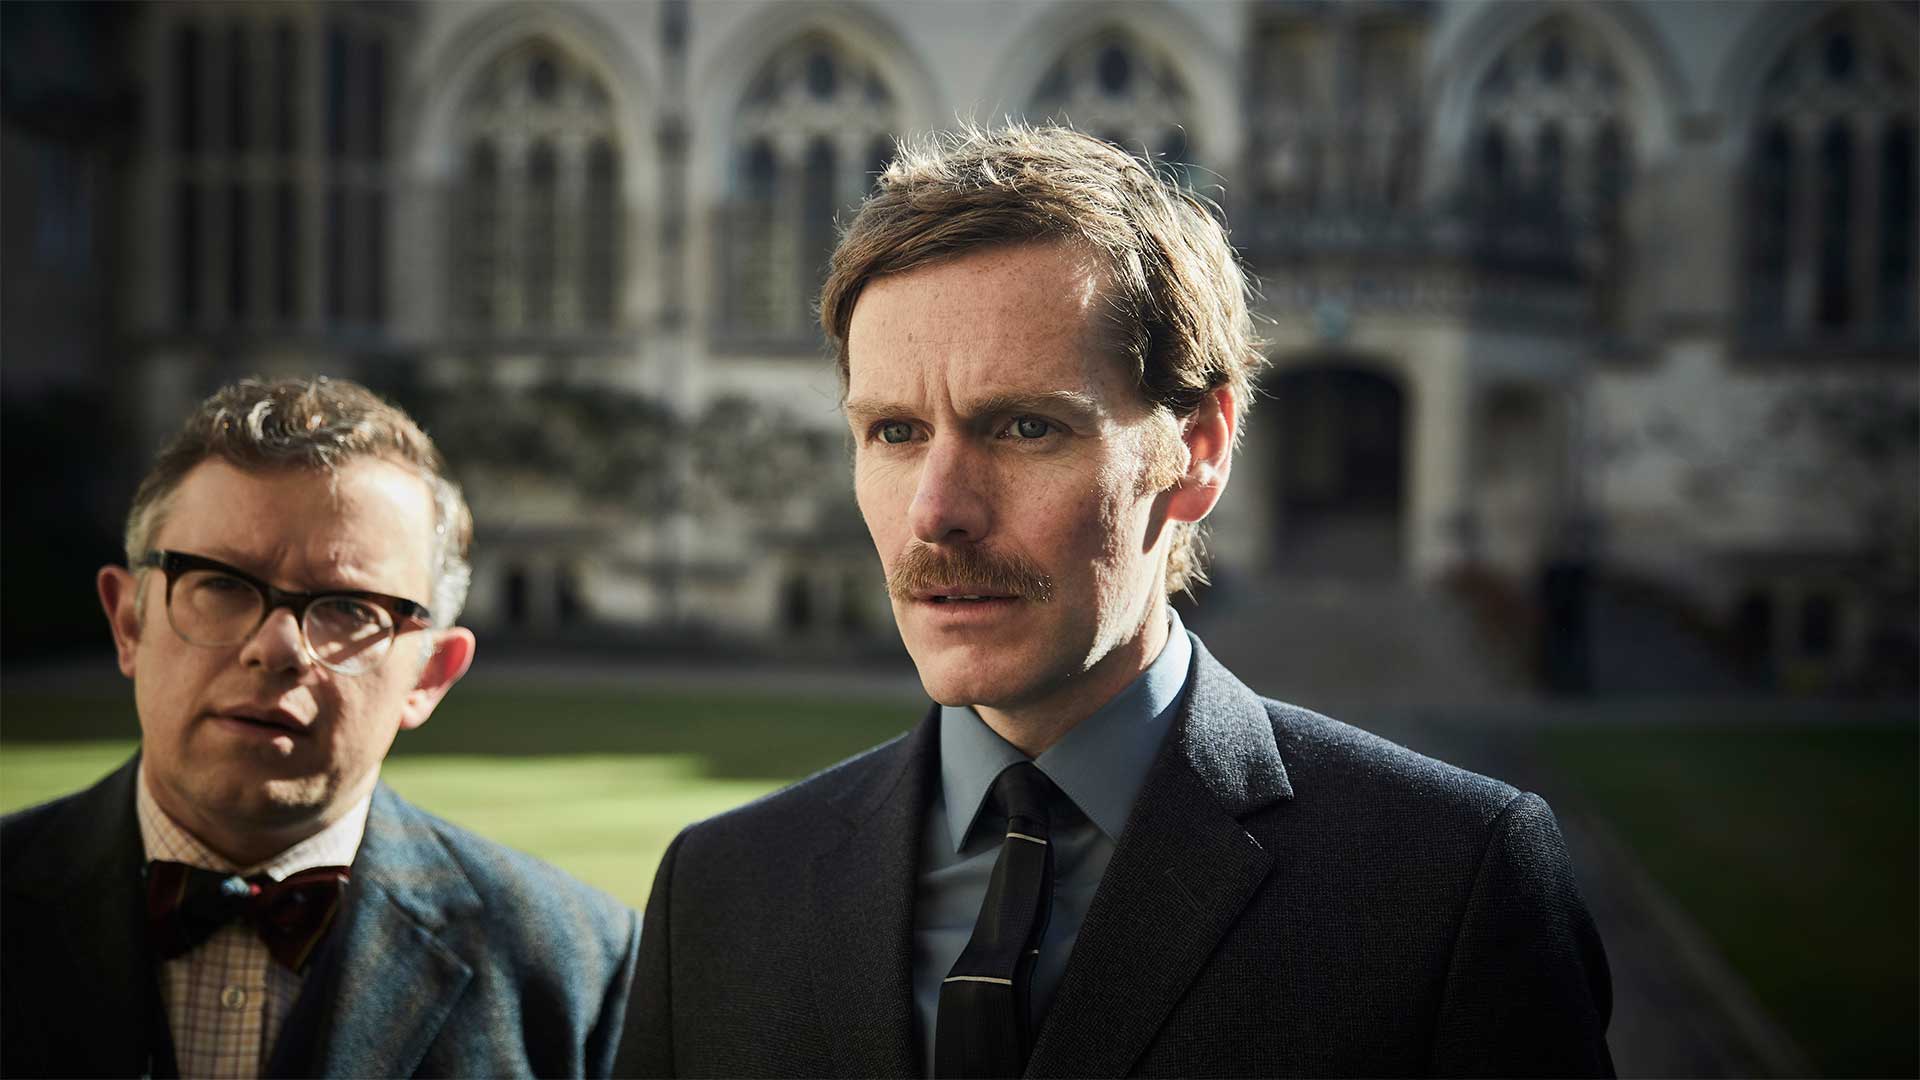 JAMES BRADSHAW as Dr. Max DeBryn and SHAUN EVANS as Endeavour